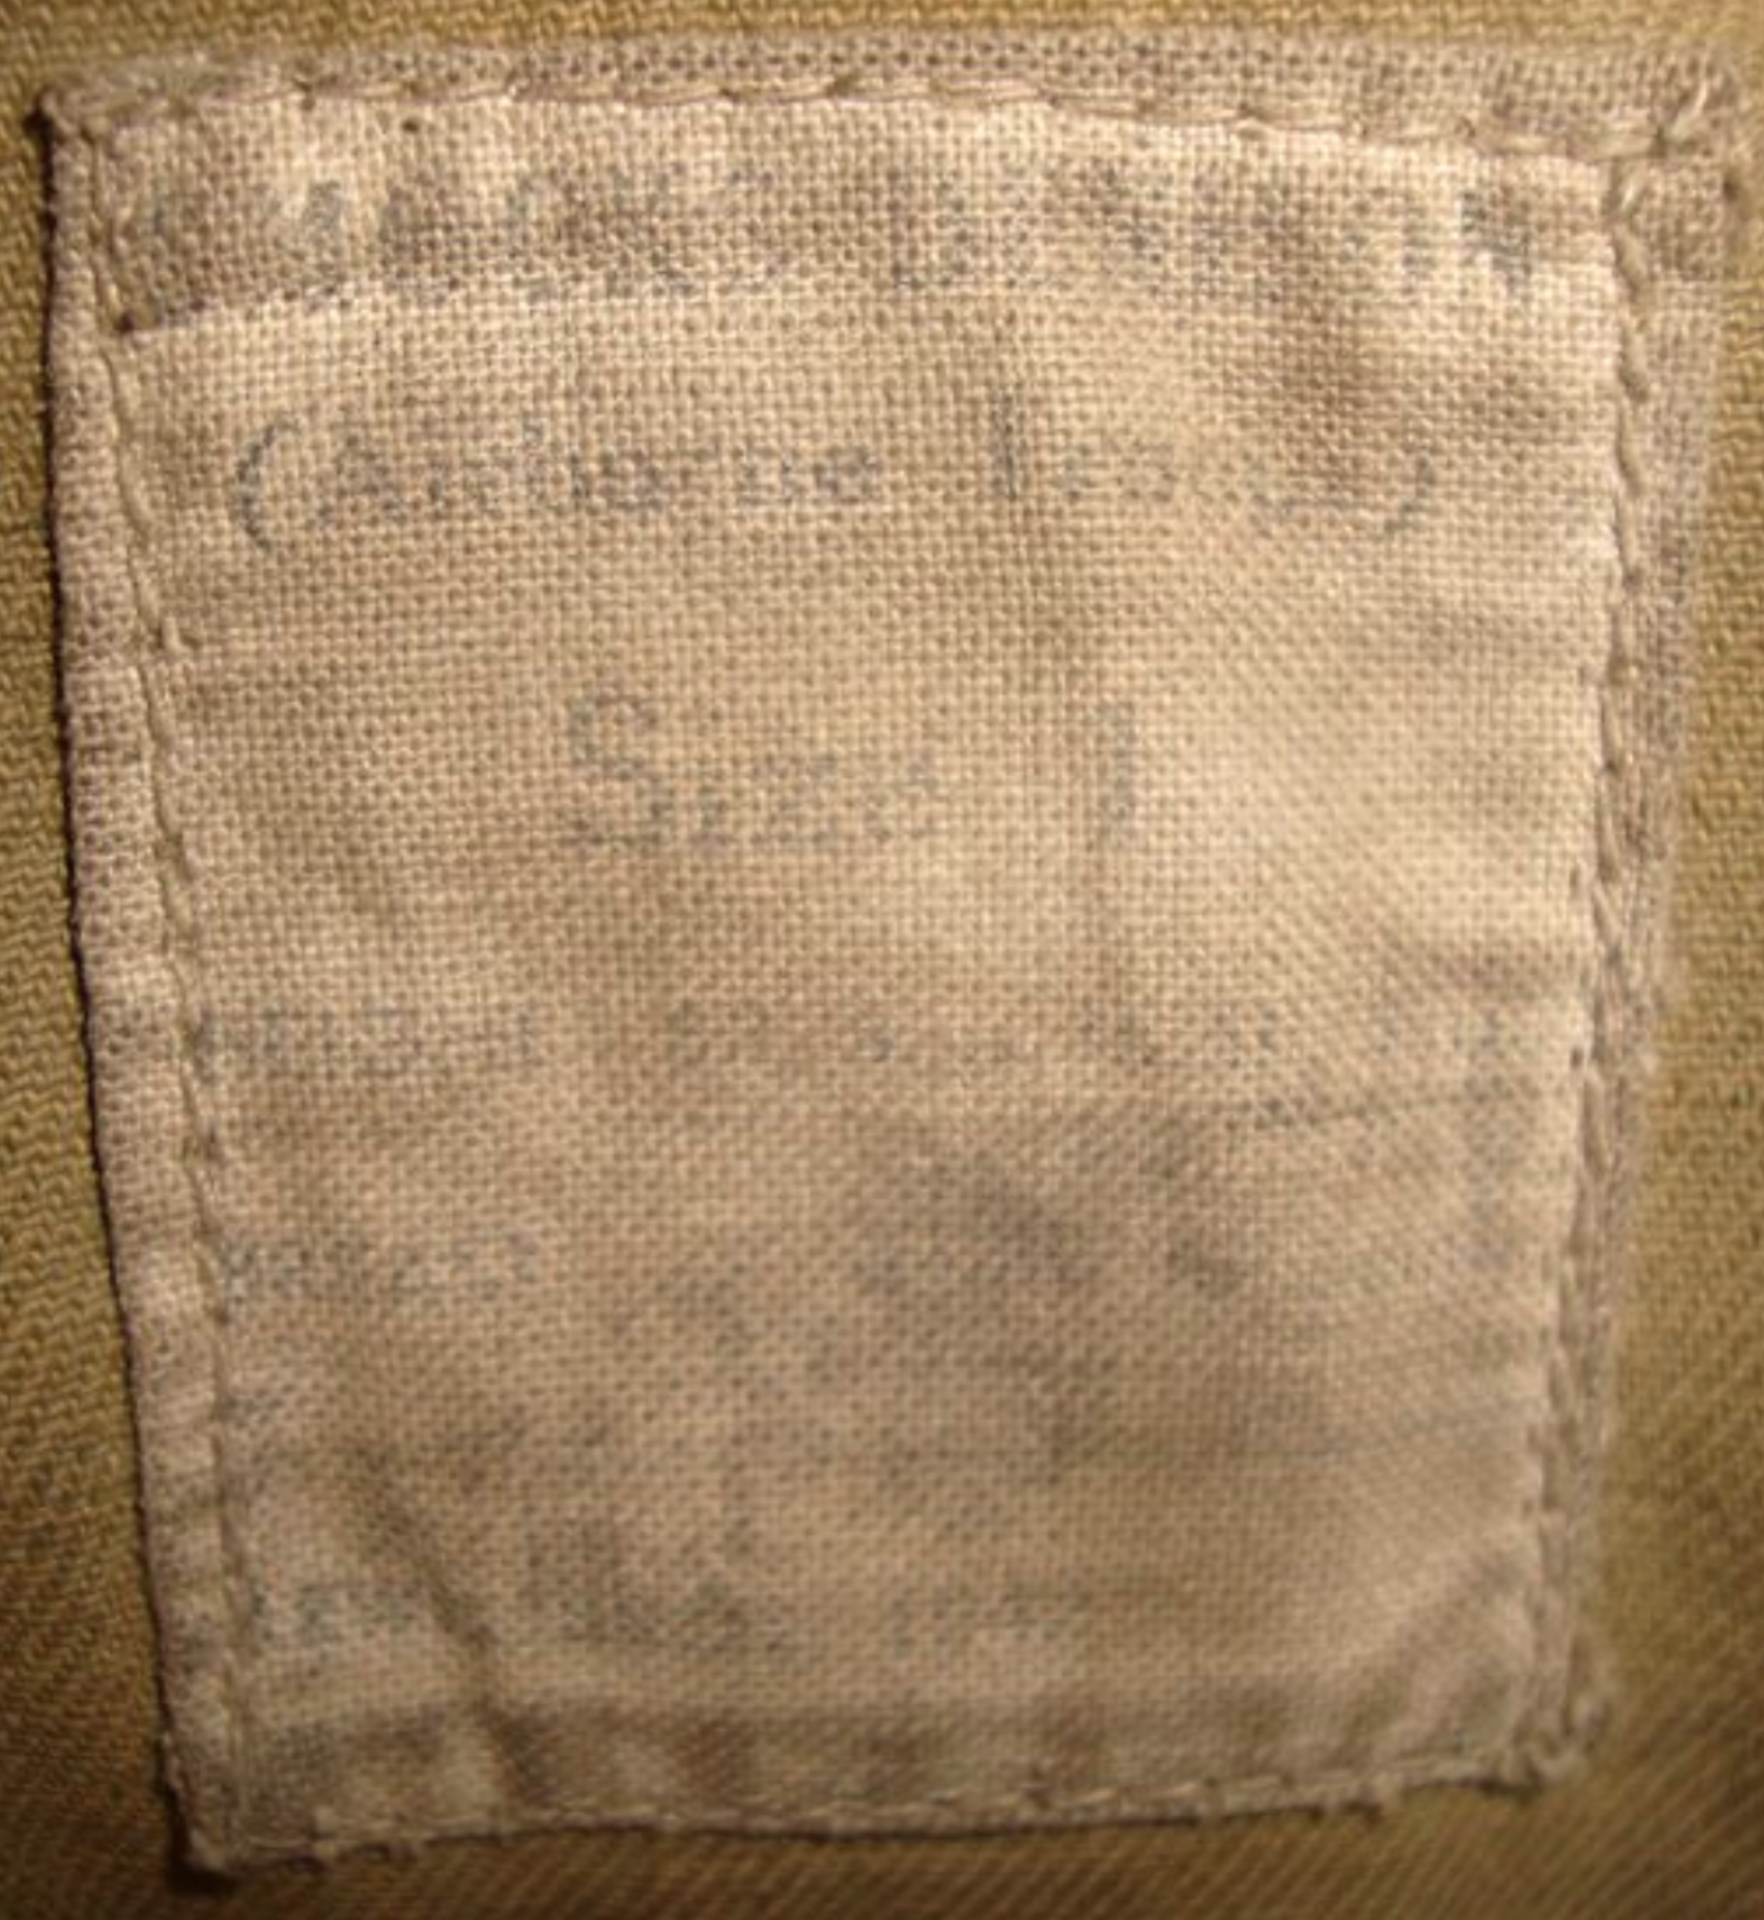 Original Very Early WW2 1942 Dated British Airborne Para Troops Camouflaged Denison Smock Size 1 - Image 2 of 3